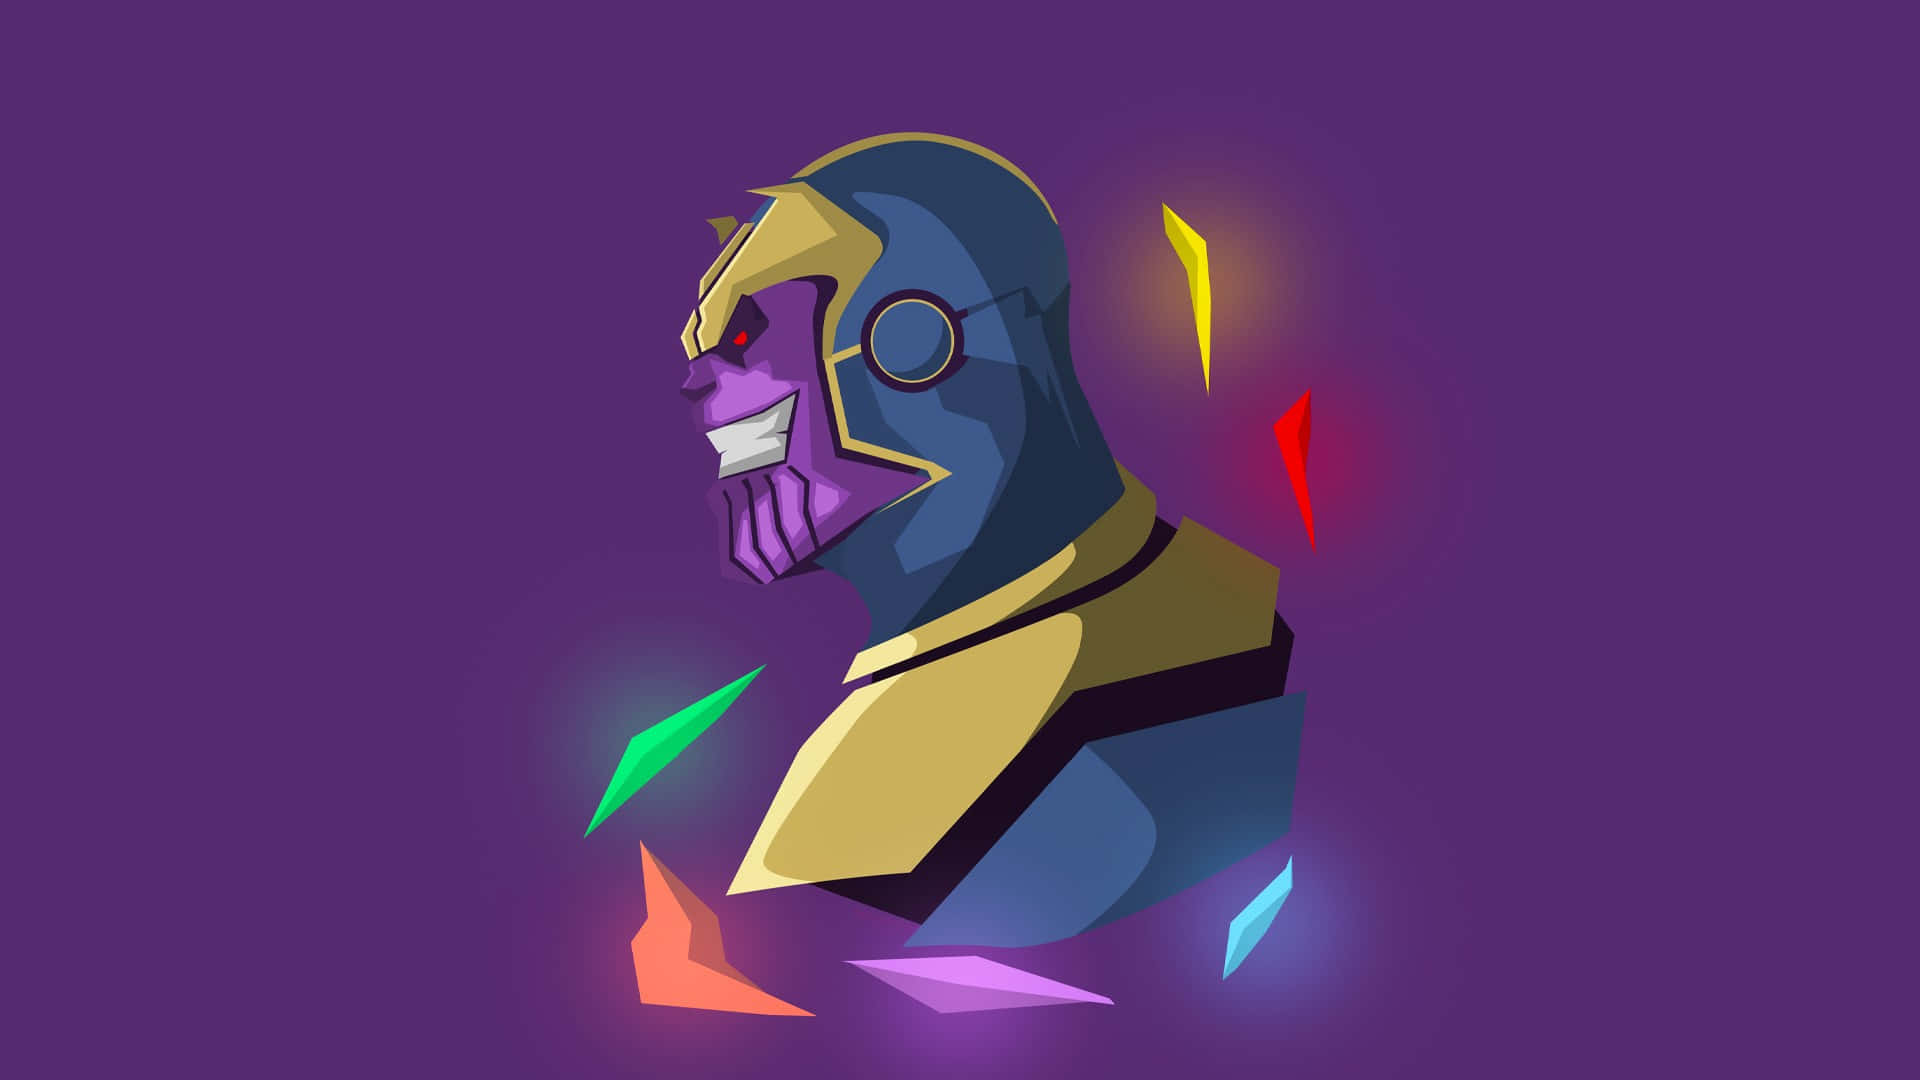 Capture the Hero Within – Style your profile with Marvel's Unique Profile Pictures